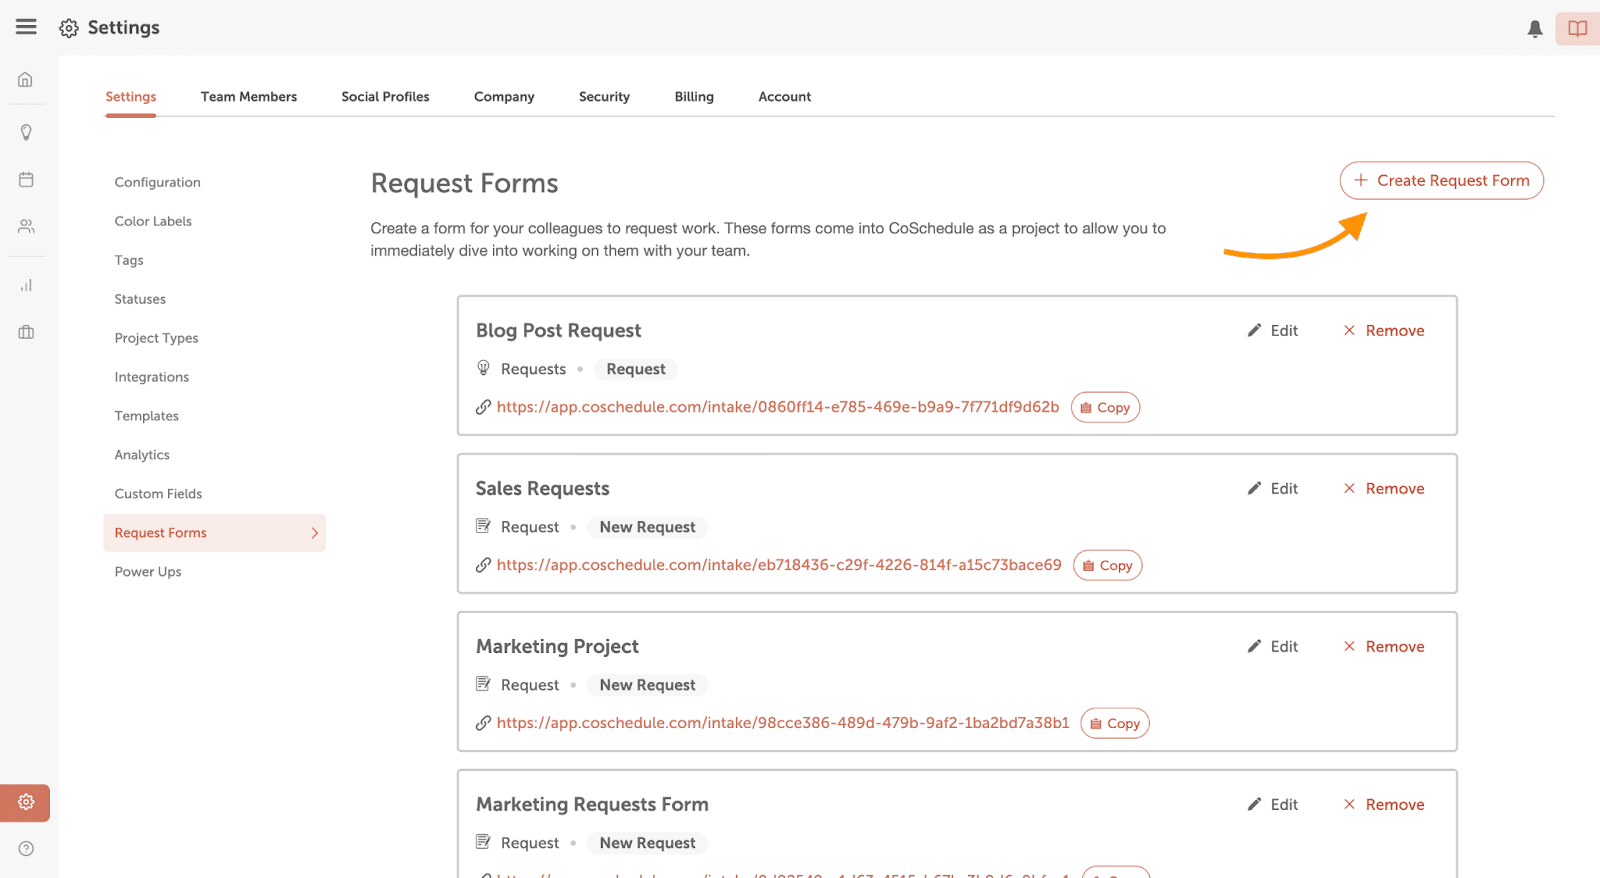 Tutorial on how to create a request form on the coschedule marketing calendar.